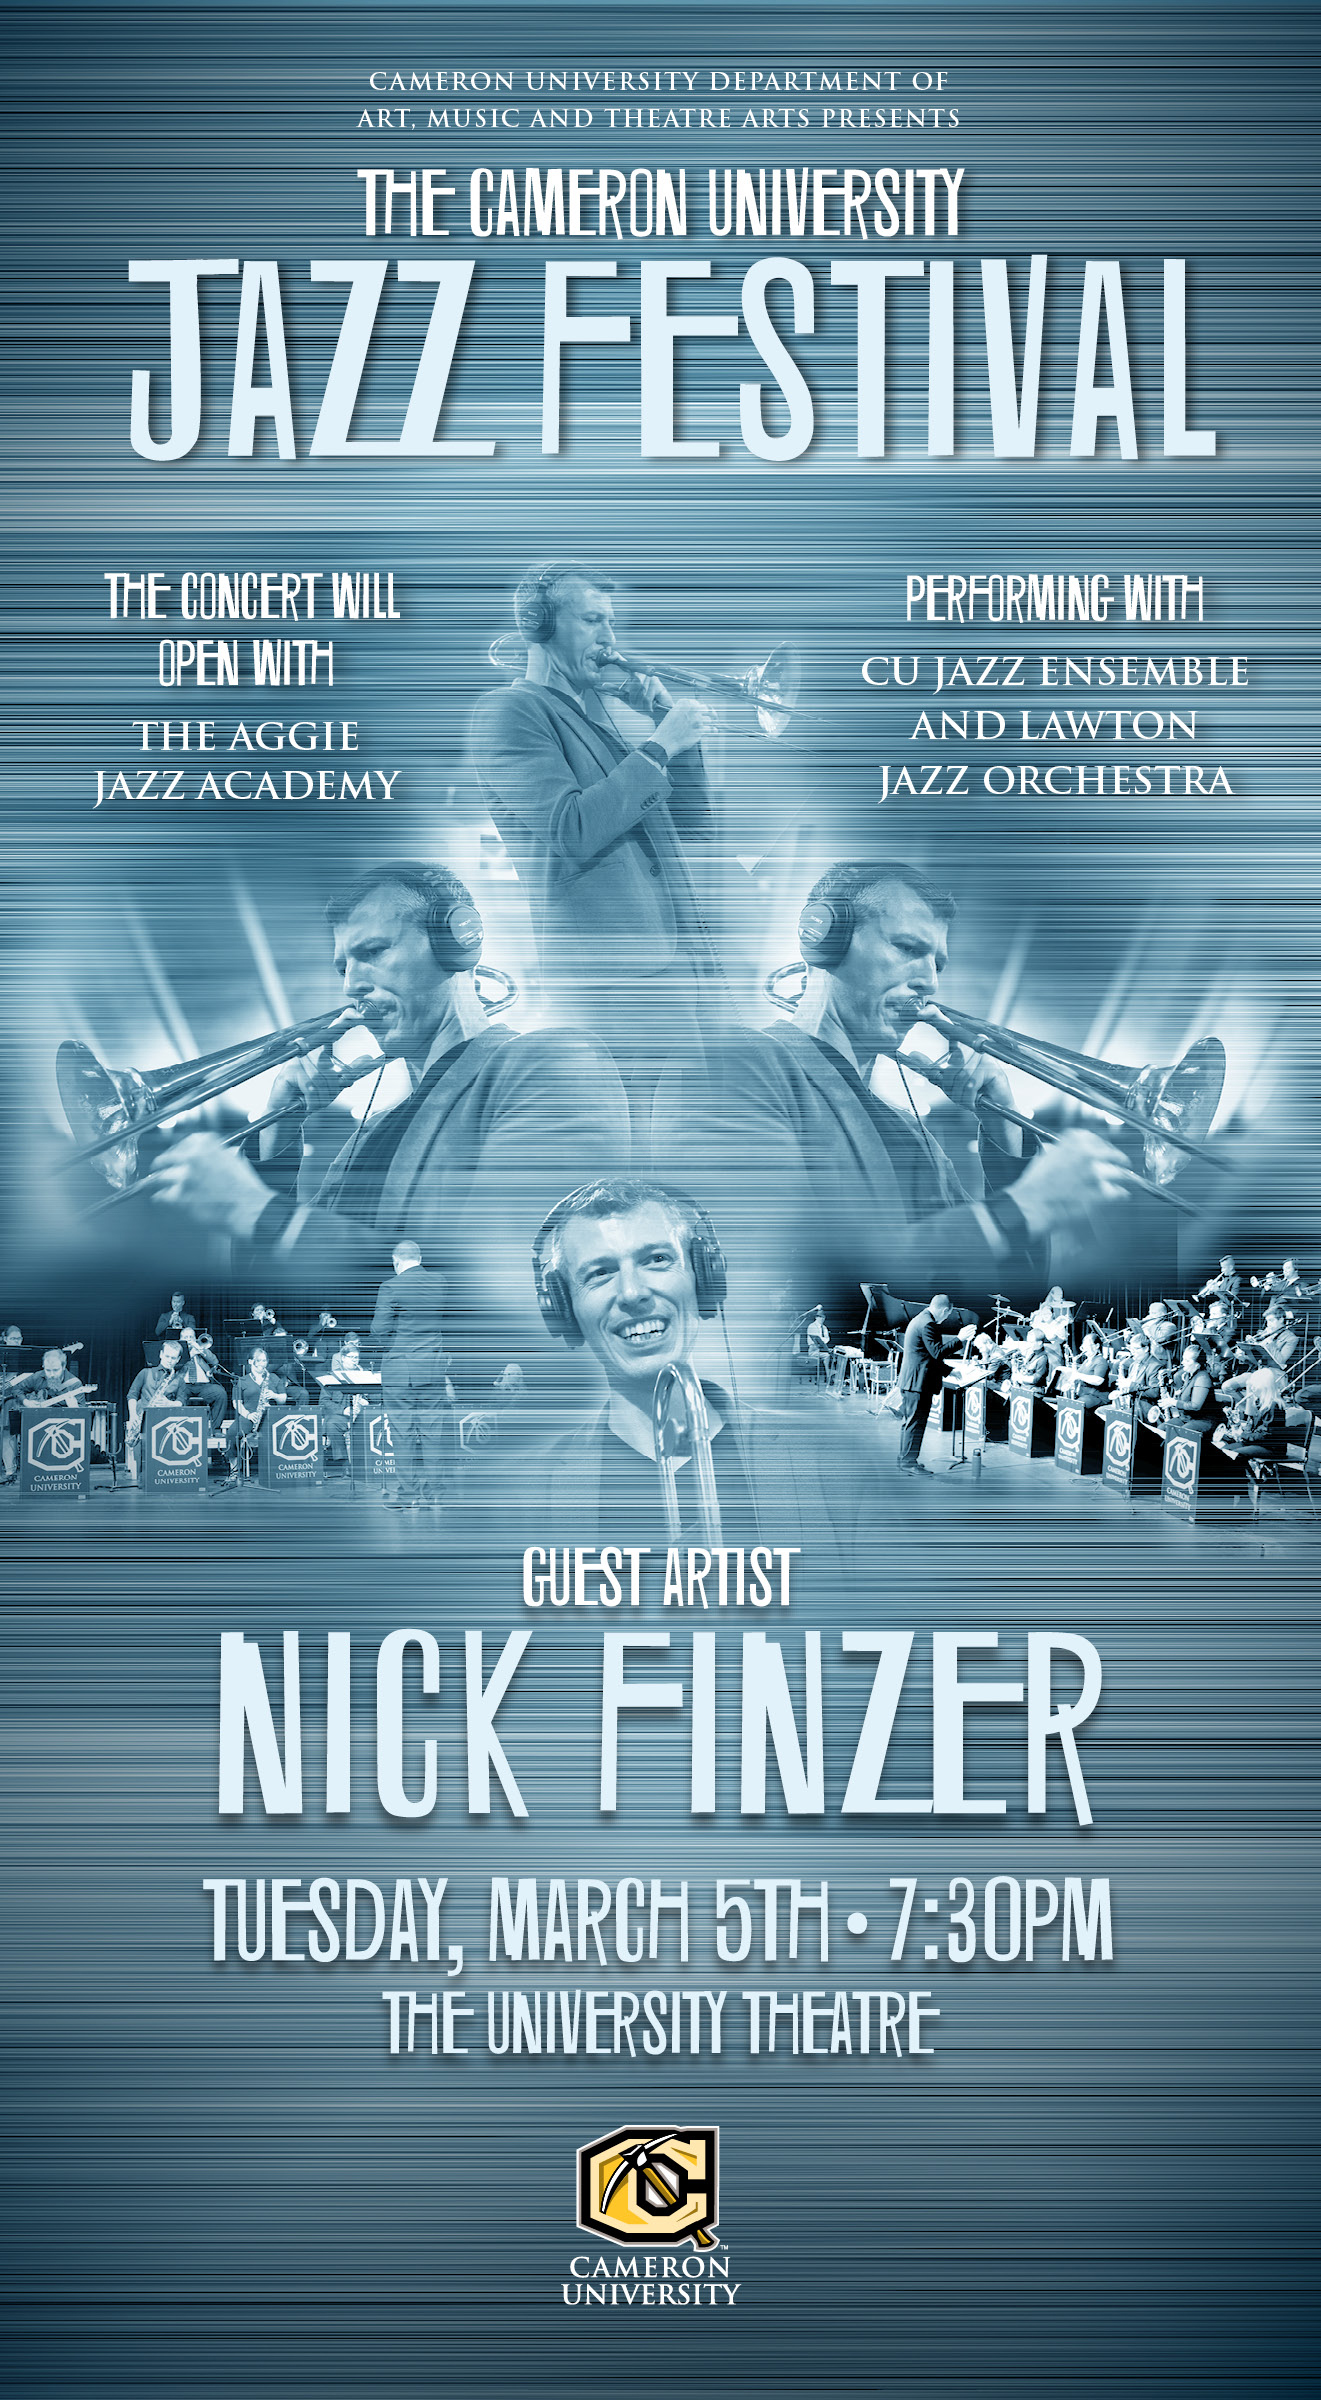 Cameron University Department of Art, Music and Theatre Arts presents
The Cameron University Jazz festival
The concert will open with the Aggie Jazz Academy.
Performing with CU Jazz Ensemble and Lawton Jazz Orchestra
Guest artist Nick Finzer
Tuesday March 5 7:30 p.m. Unversity Theatre